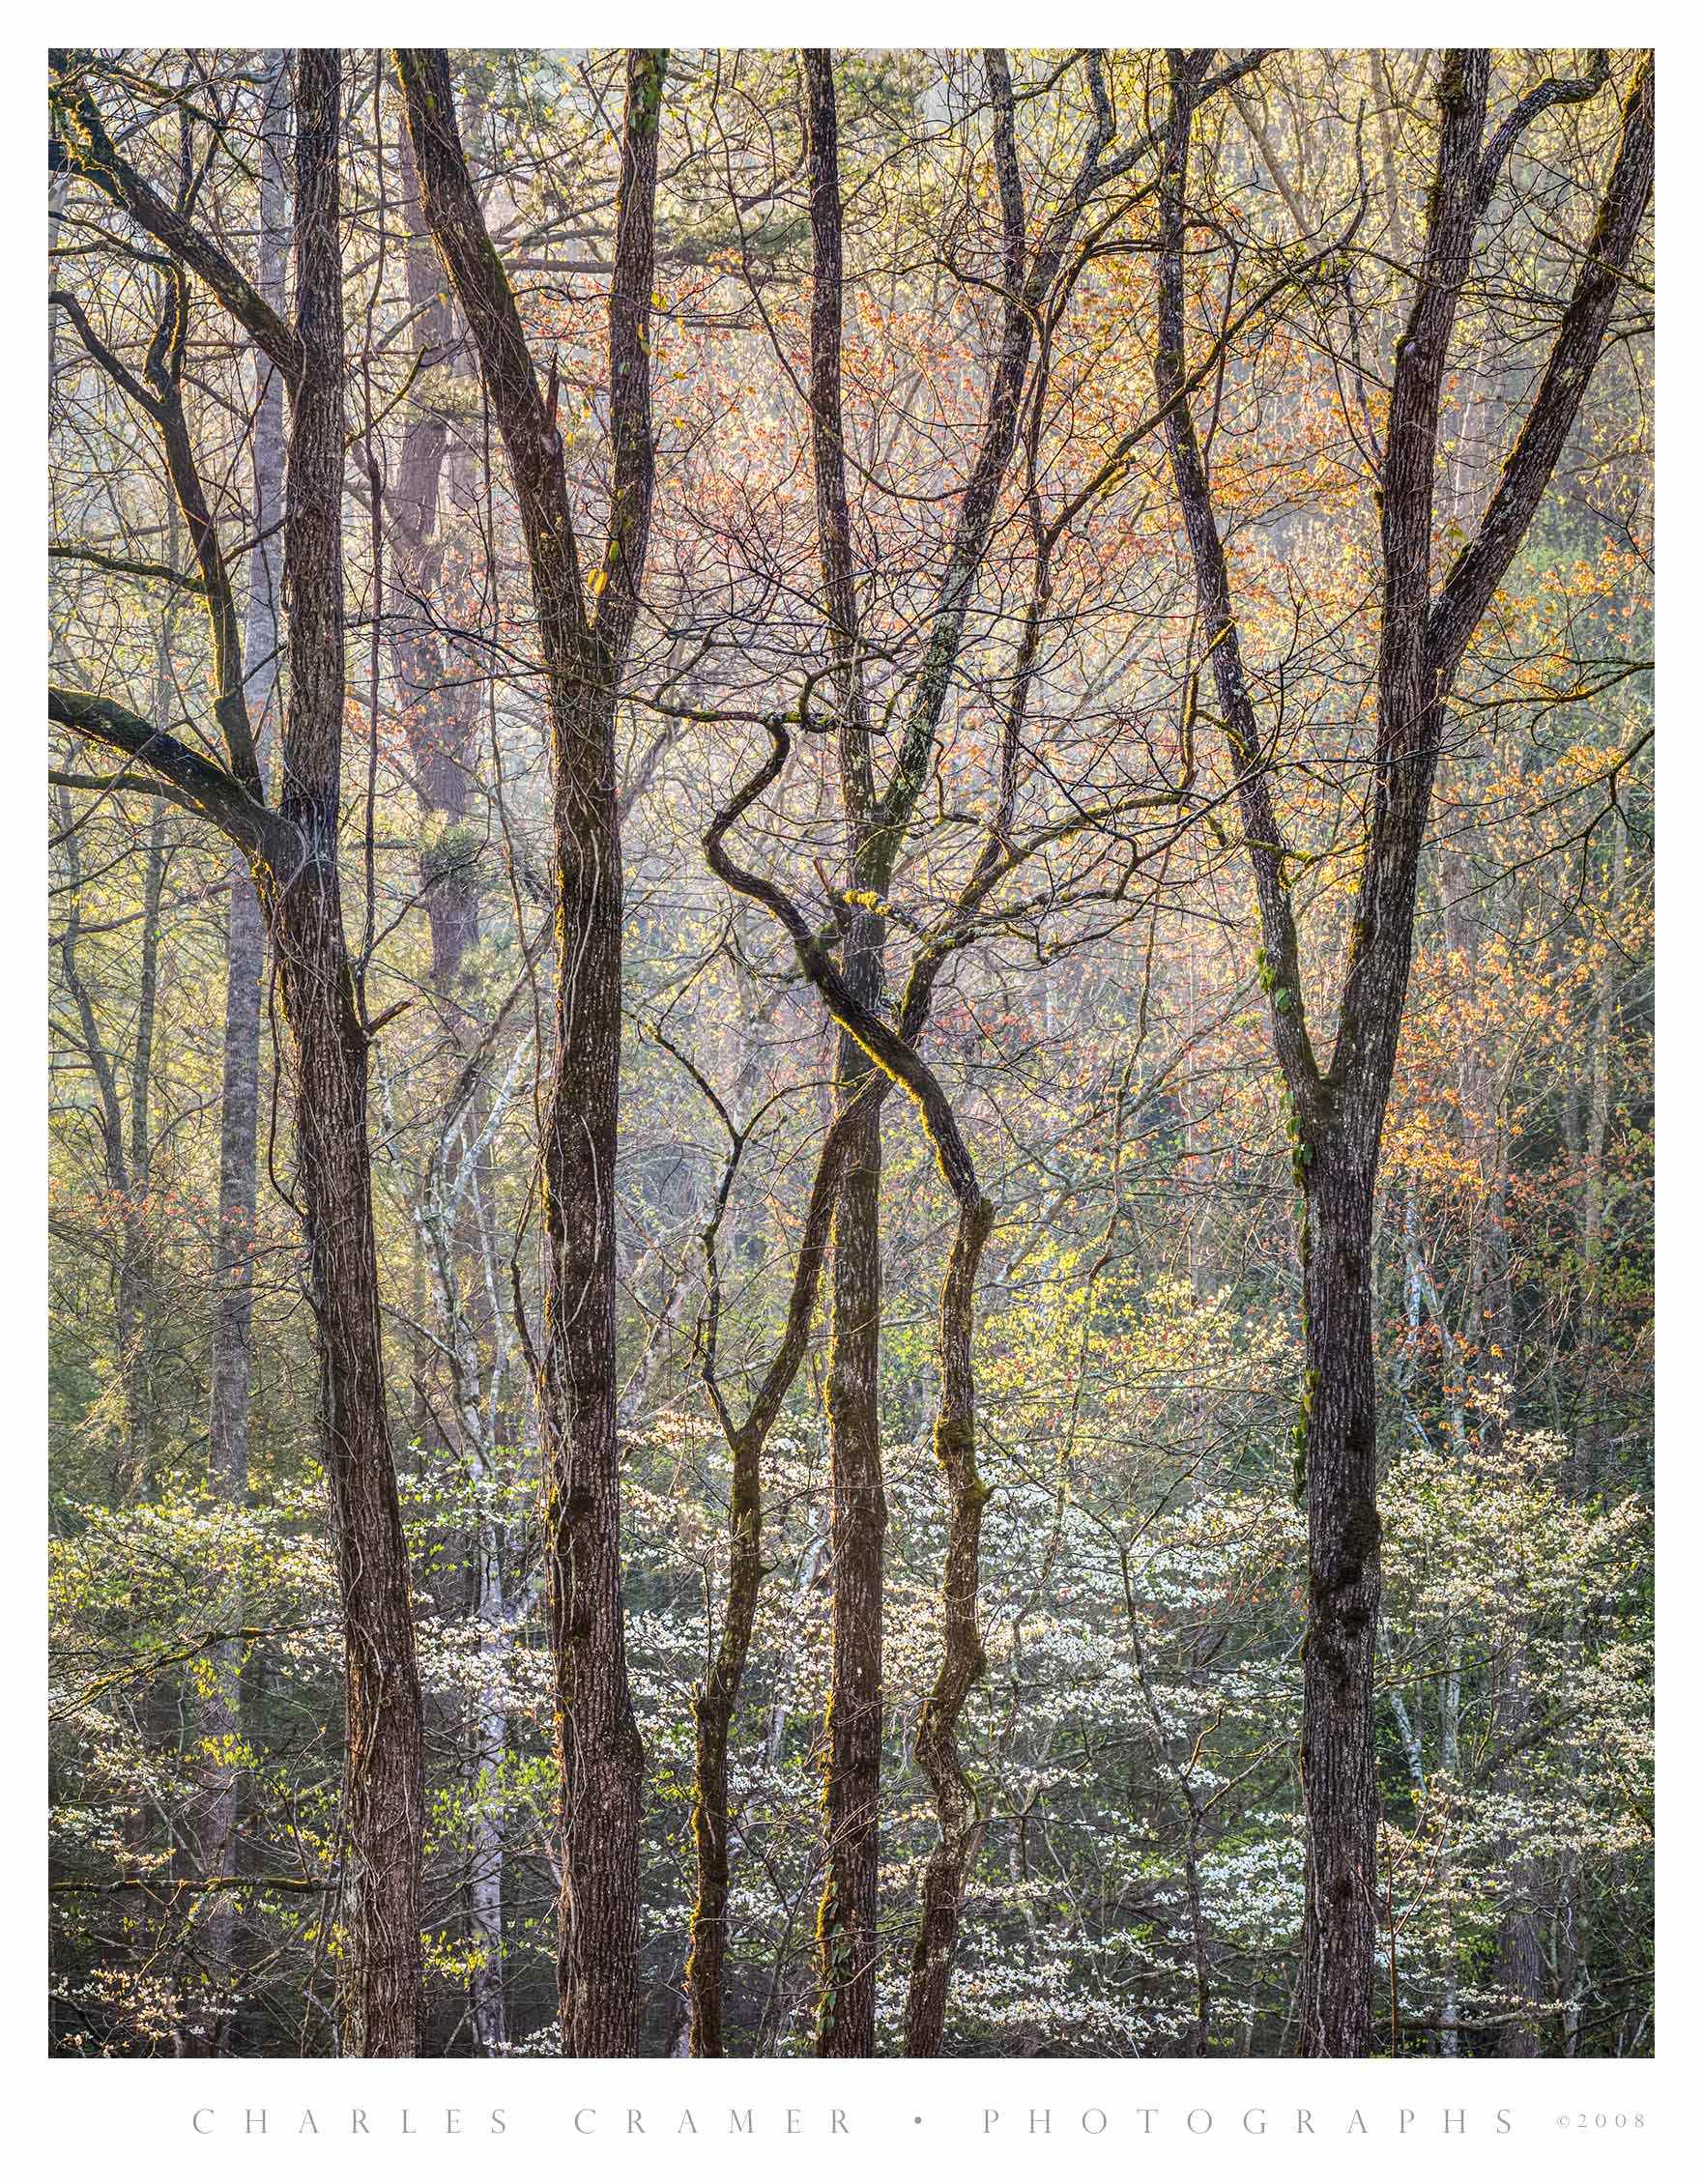 Intertwined Trees and Dogwood, Great Smoky Mountains